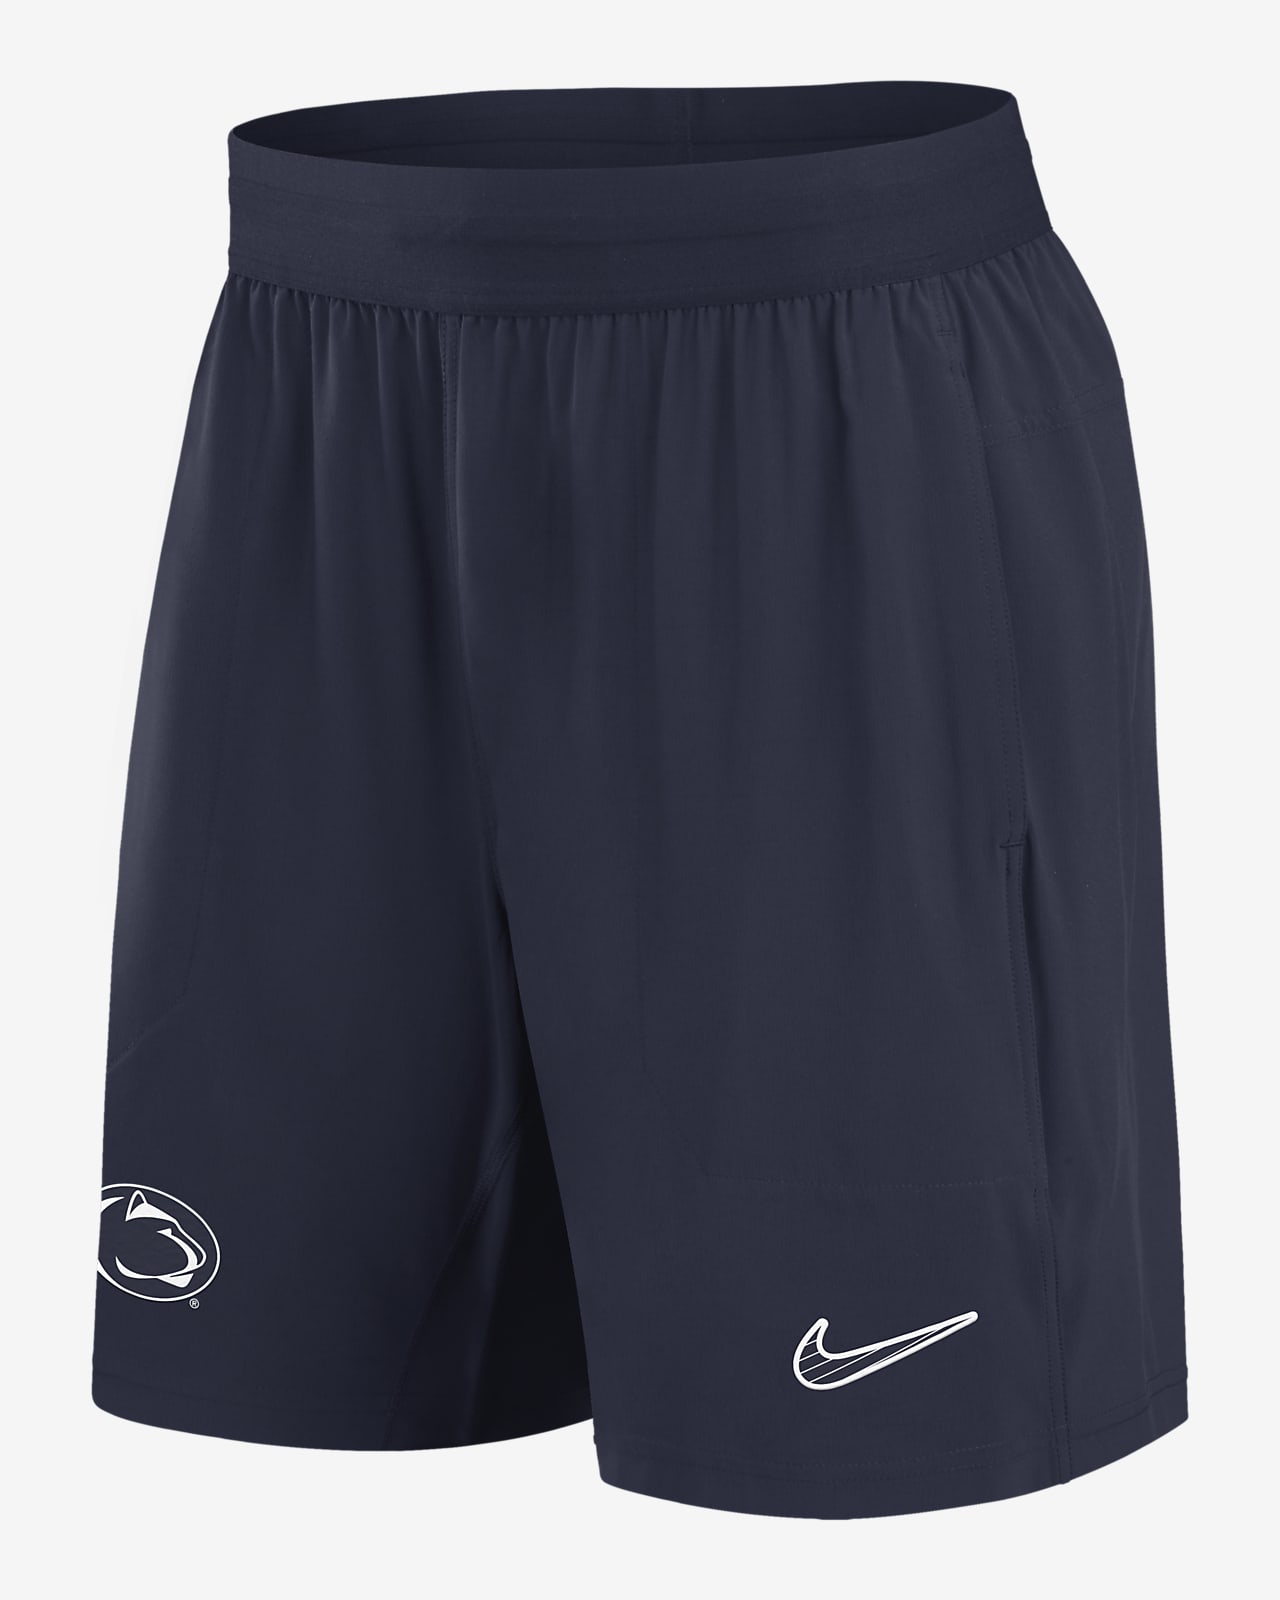 Penn State Nittany Lions Sideline Men's Nike Dri-FIT College Shorts